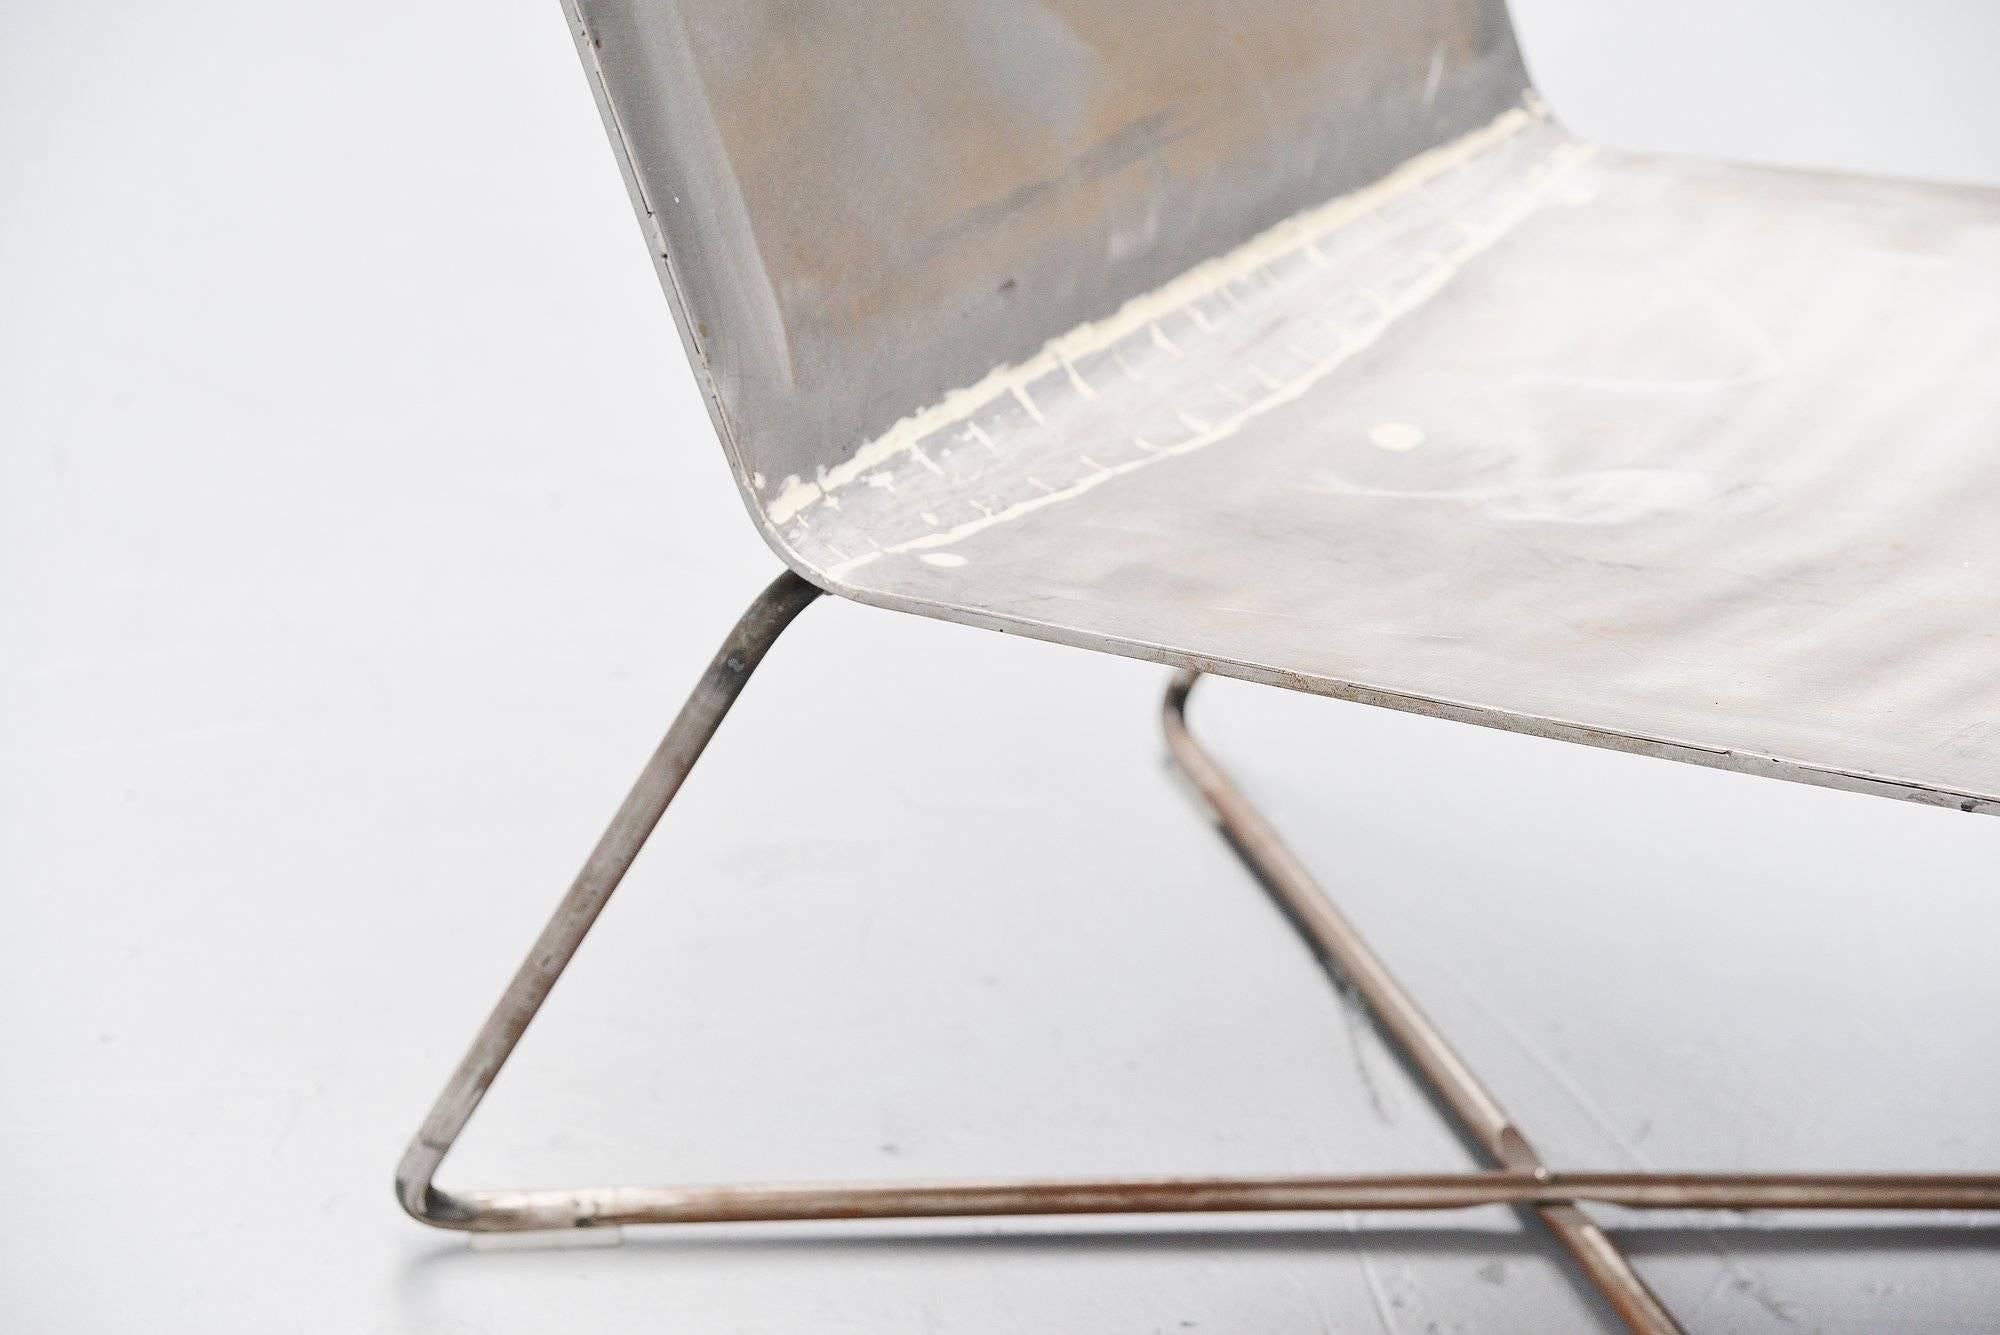 Unique prototype from the LC03 lounge chair designed by Maarten van Severen and Fabian Schwaerzler for Pastoe, Holland 2003. This chair has a solid metal structure and a metal seat. Roughly finished but useable. We acquired this chair directly from